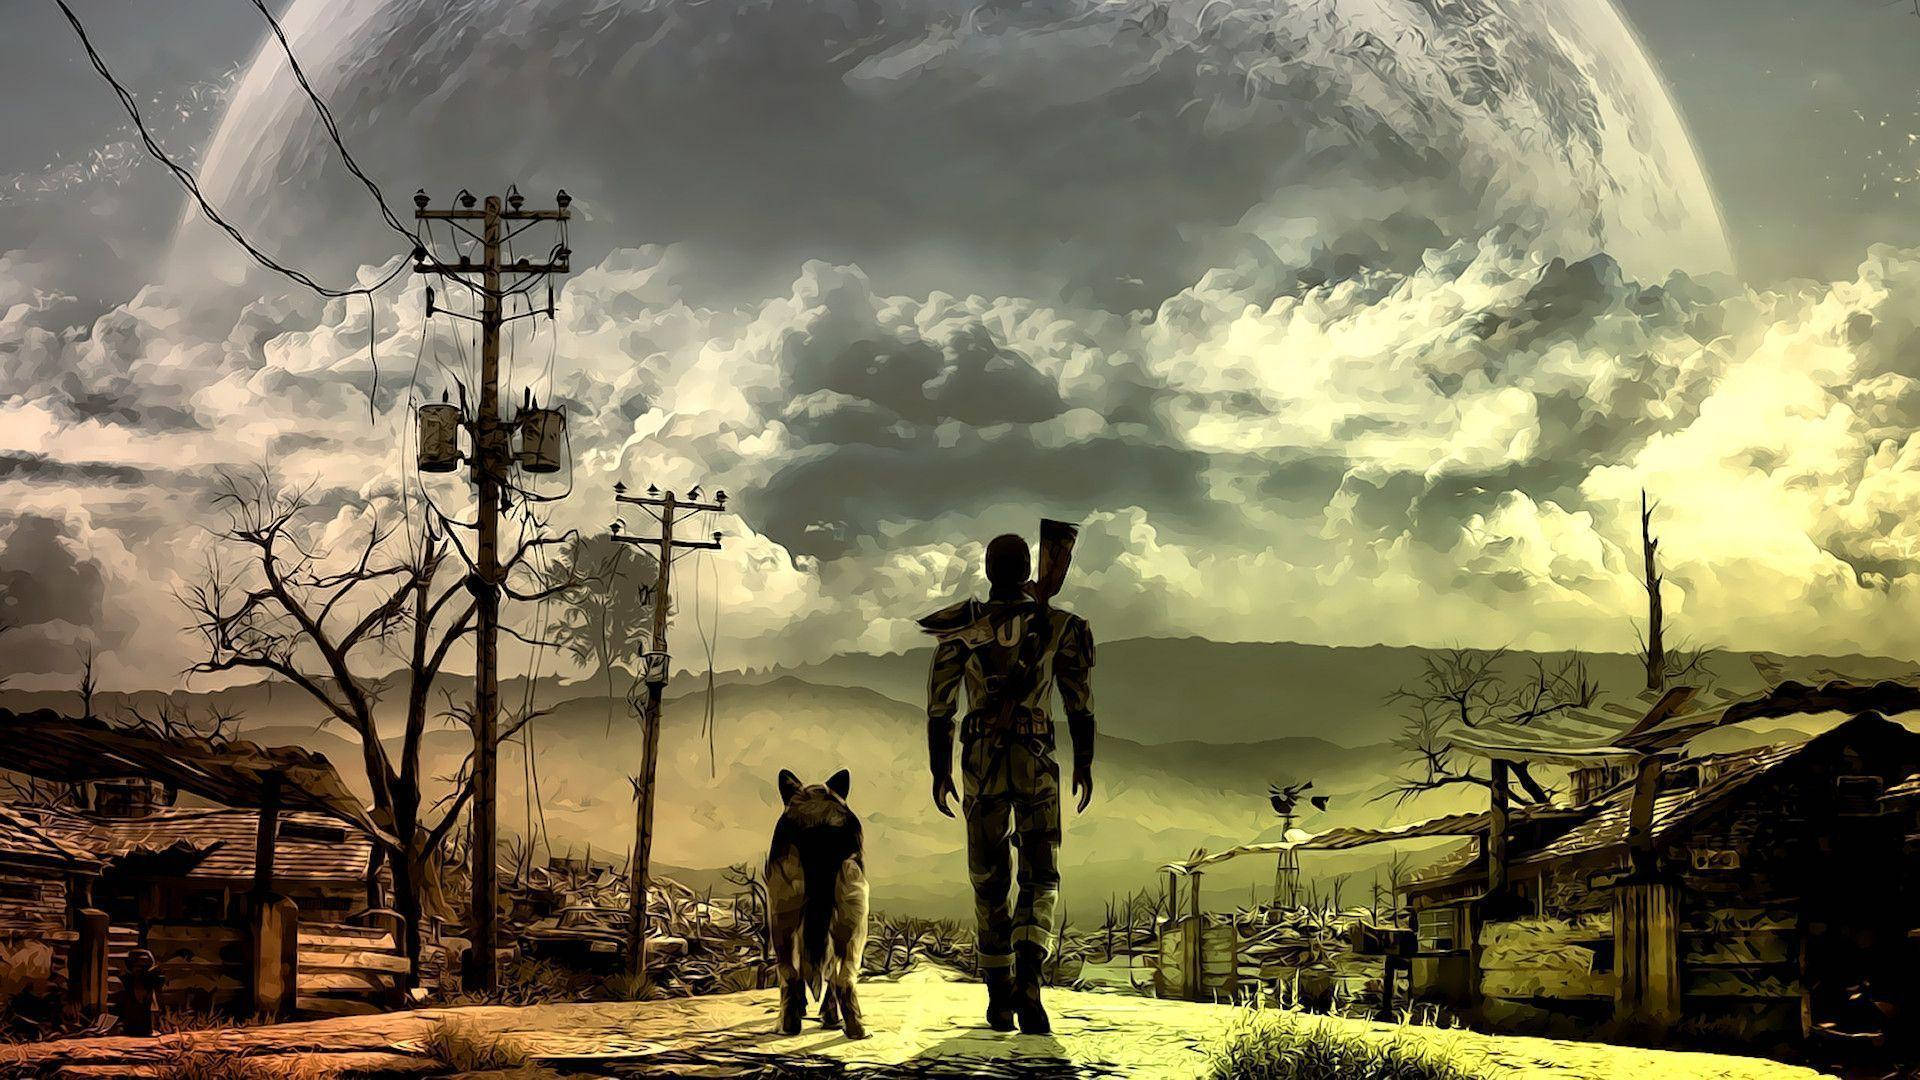 Free Fallout 4 Wallpaper Downloads, [100+] Fallout 4 Wallpapers for FREE |  